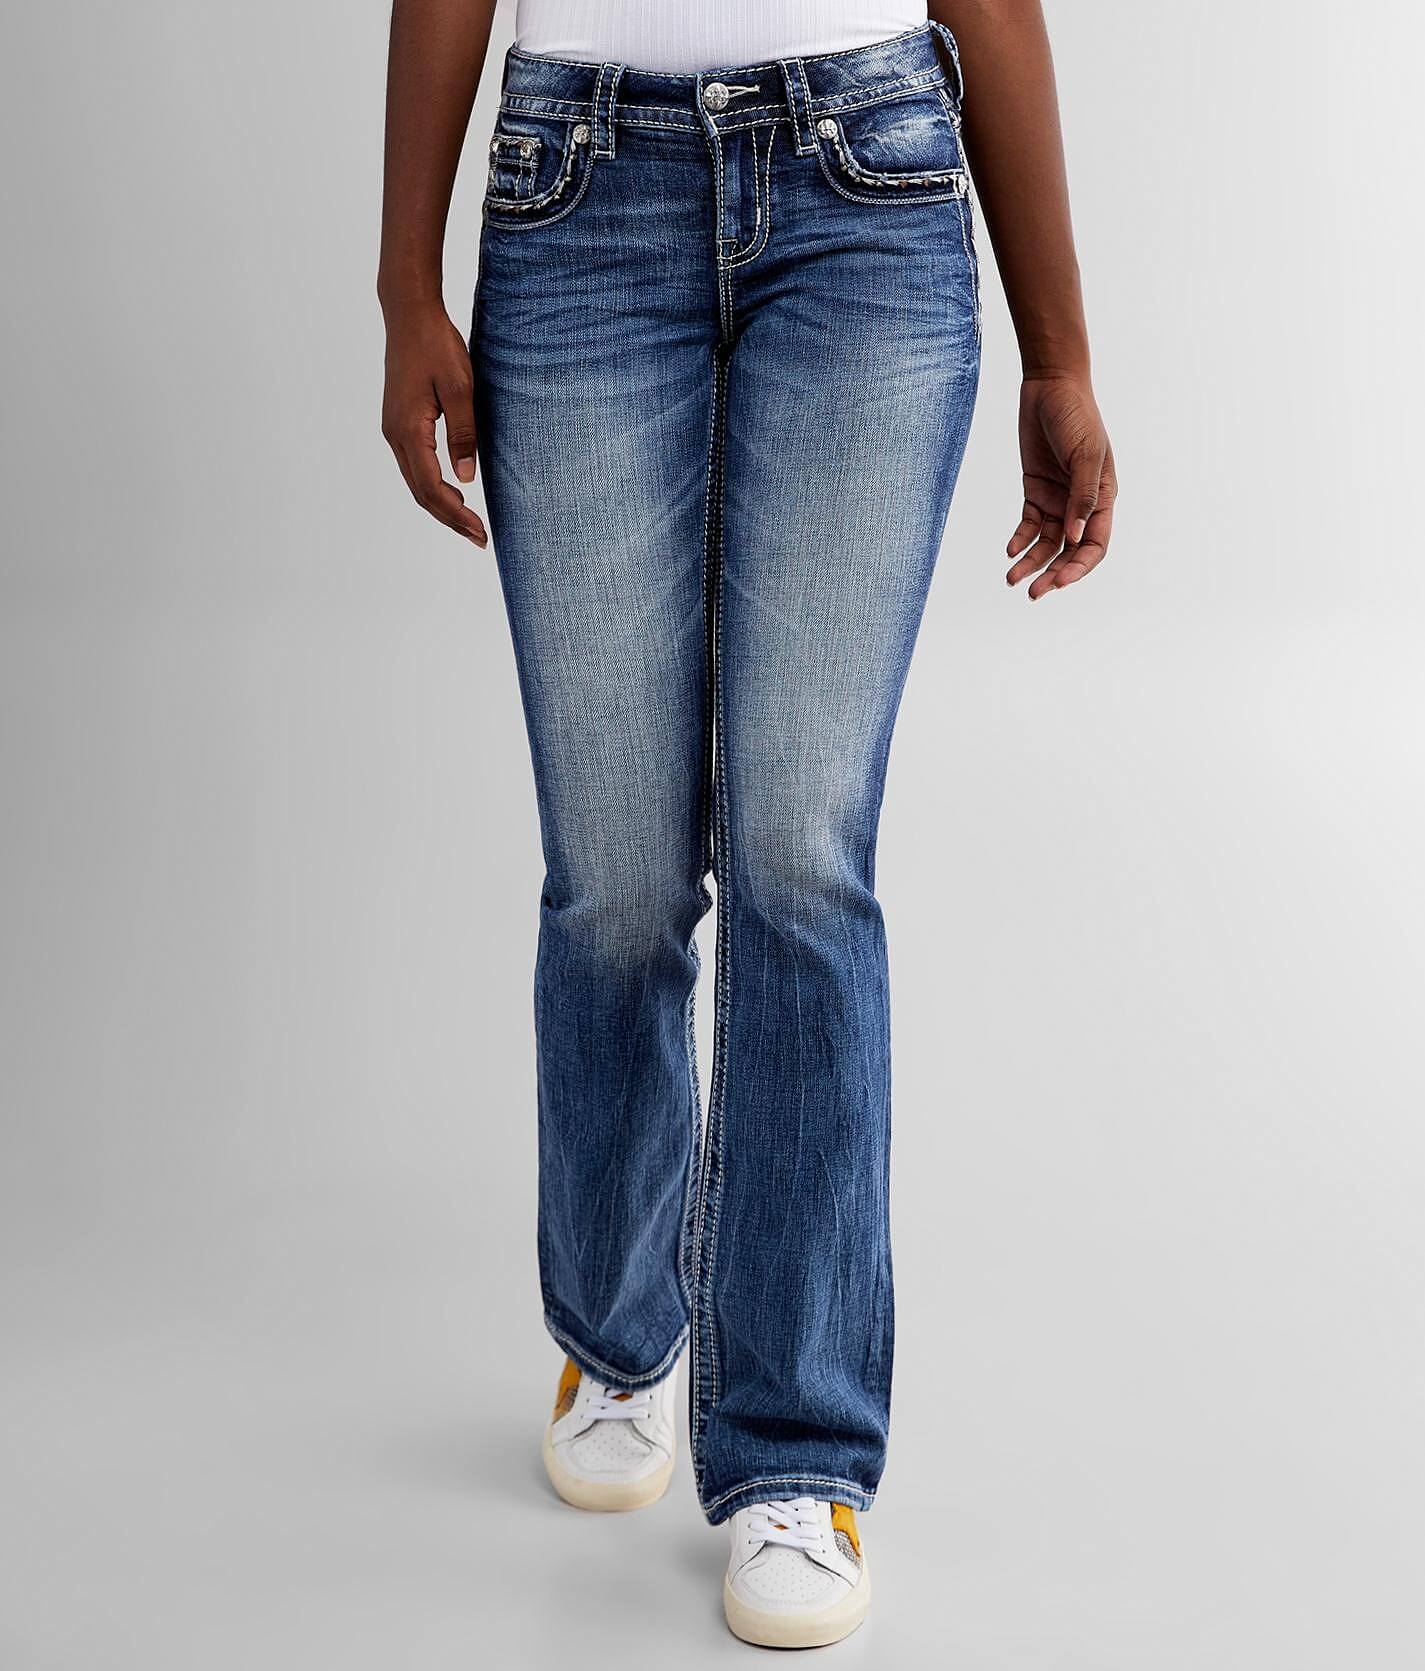 buckle low rise jeans